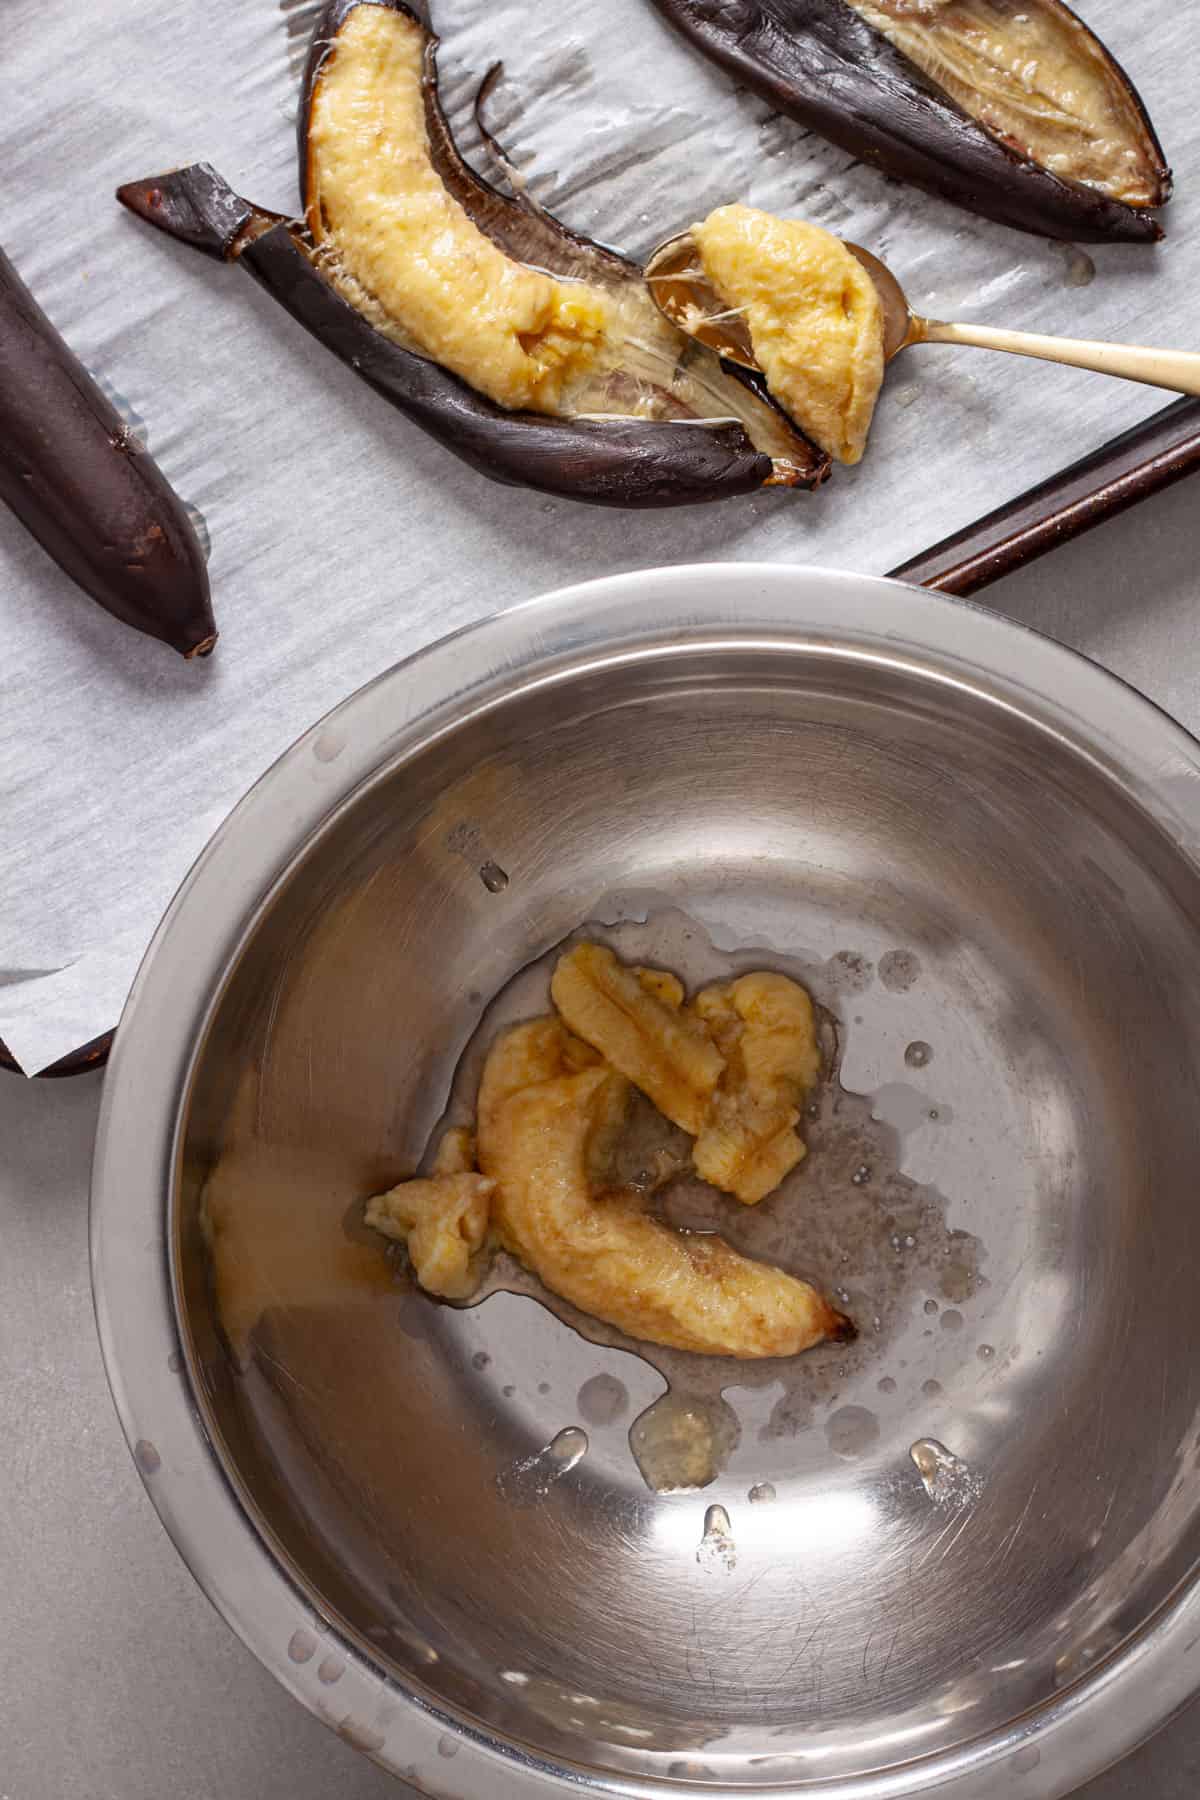 Roasted bananas added to a mixing bowl.